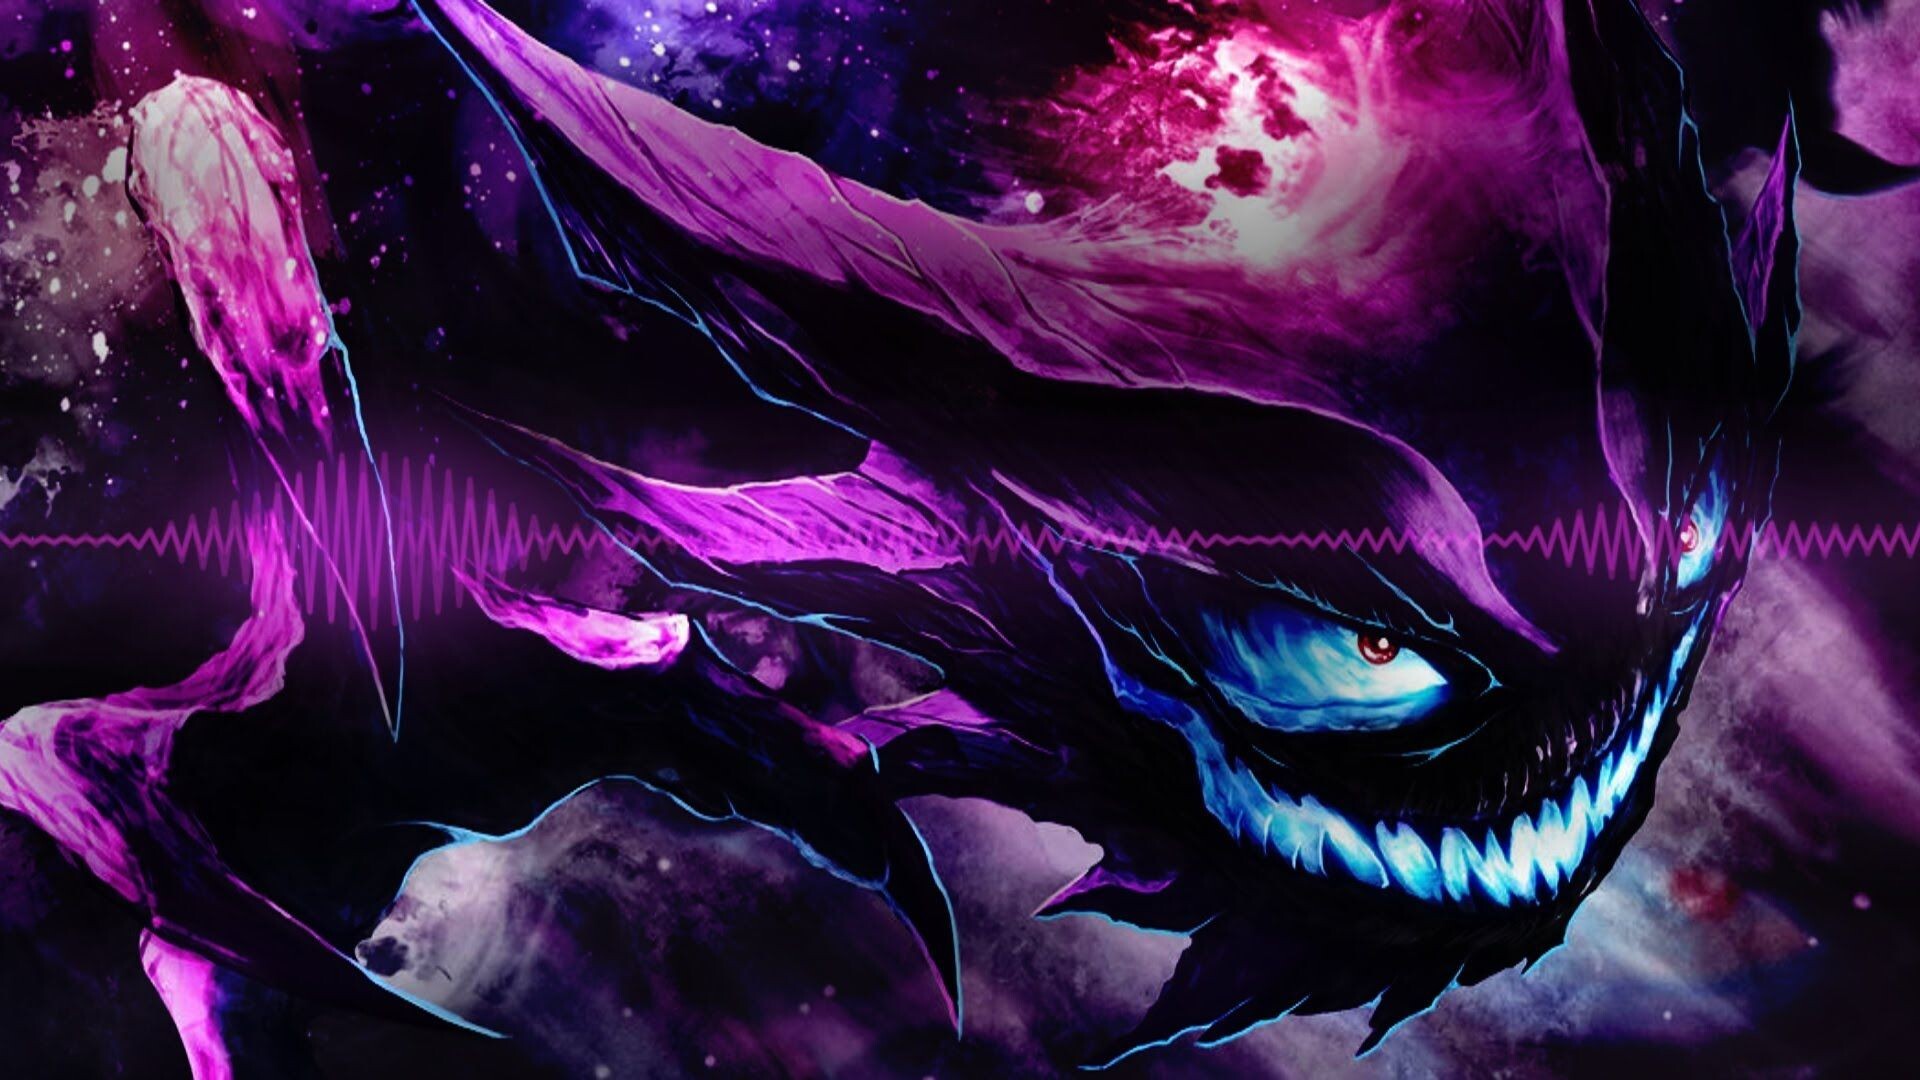 Gengar: Haunter, A purple Pokemon with a gaseous body, Triangular eyes with small pupils. 1920x1080 Full HD Wallpaper.